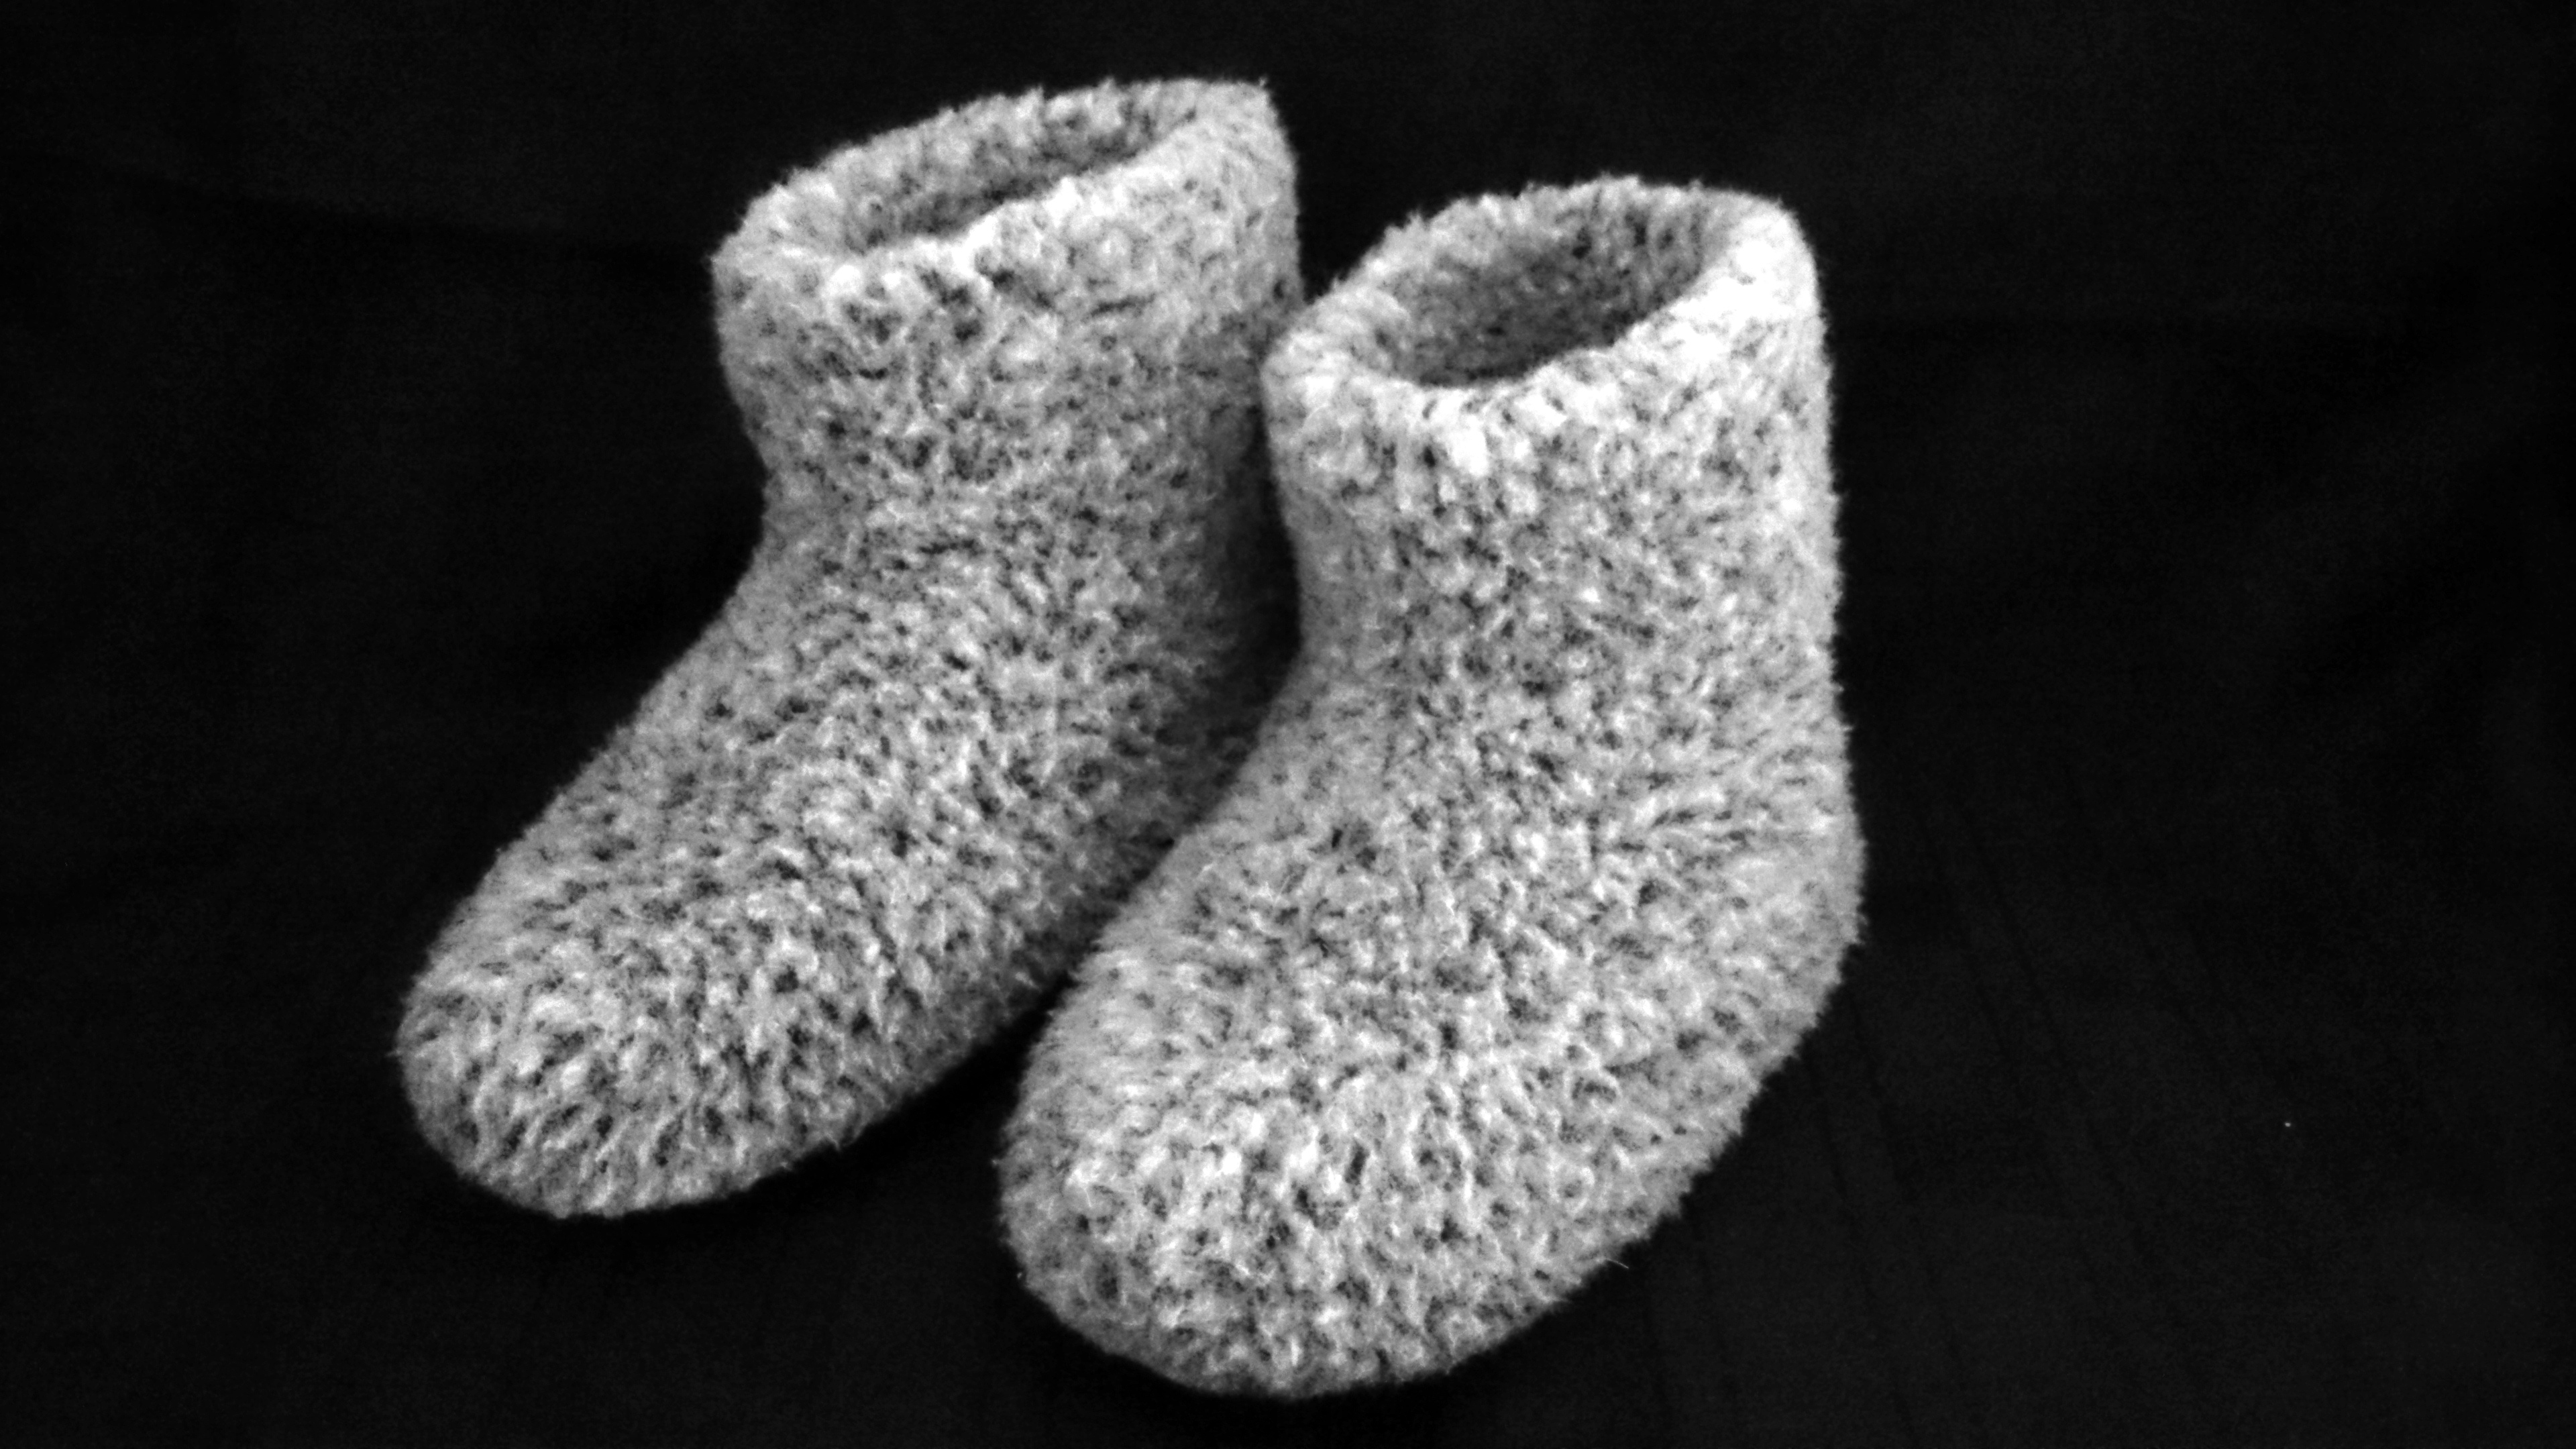 SIZE 10 UNISEX MERINO WOOL BOOTS WARM COZY SLIPPERS MOCCASINS CHUNI NATURAL 